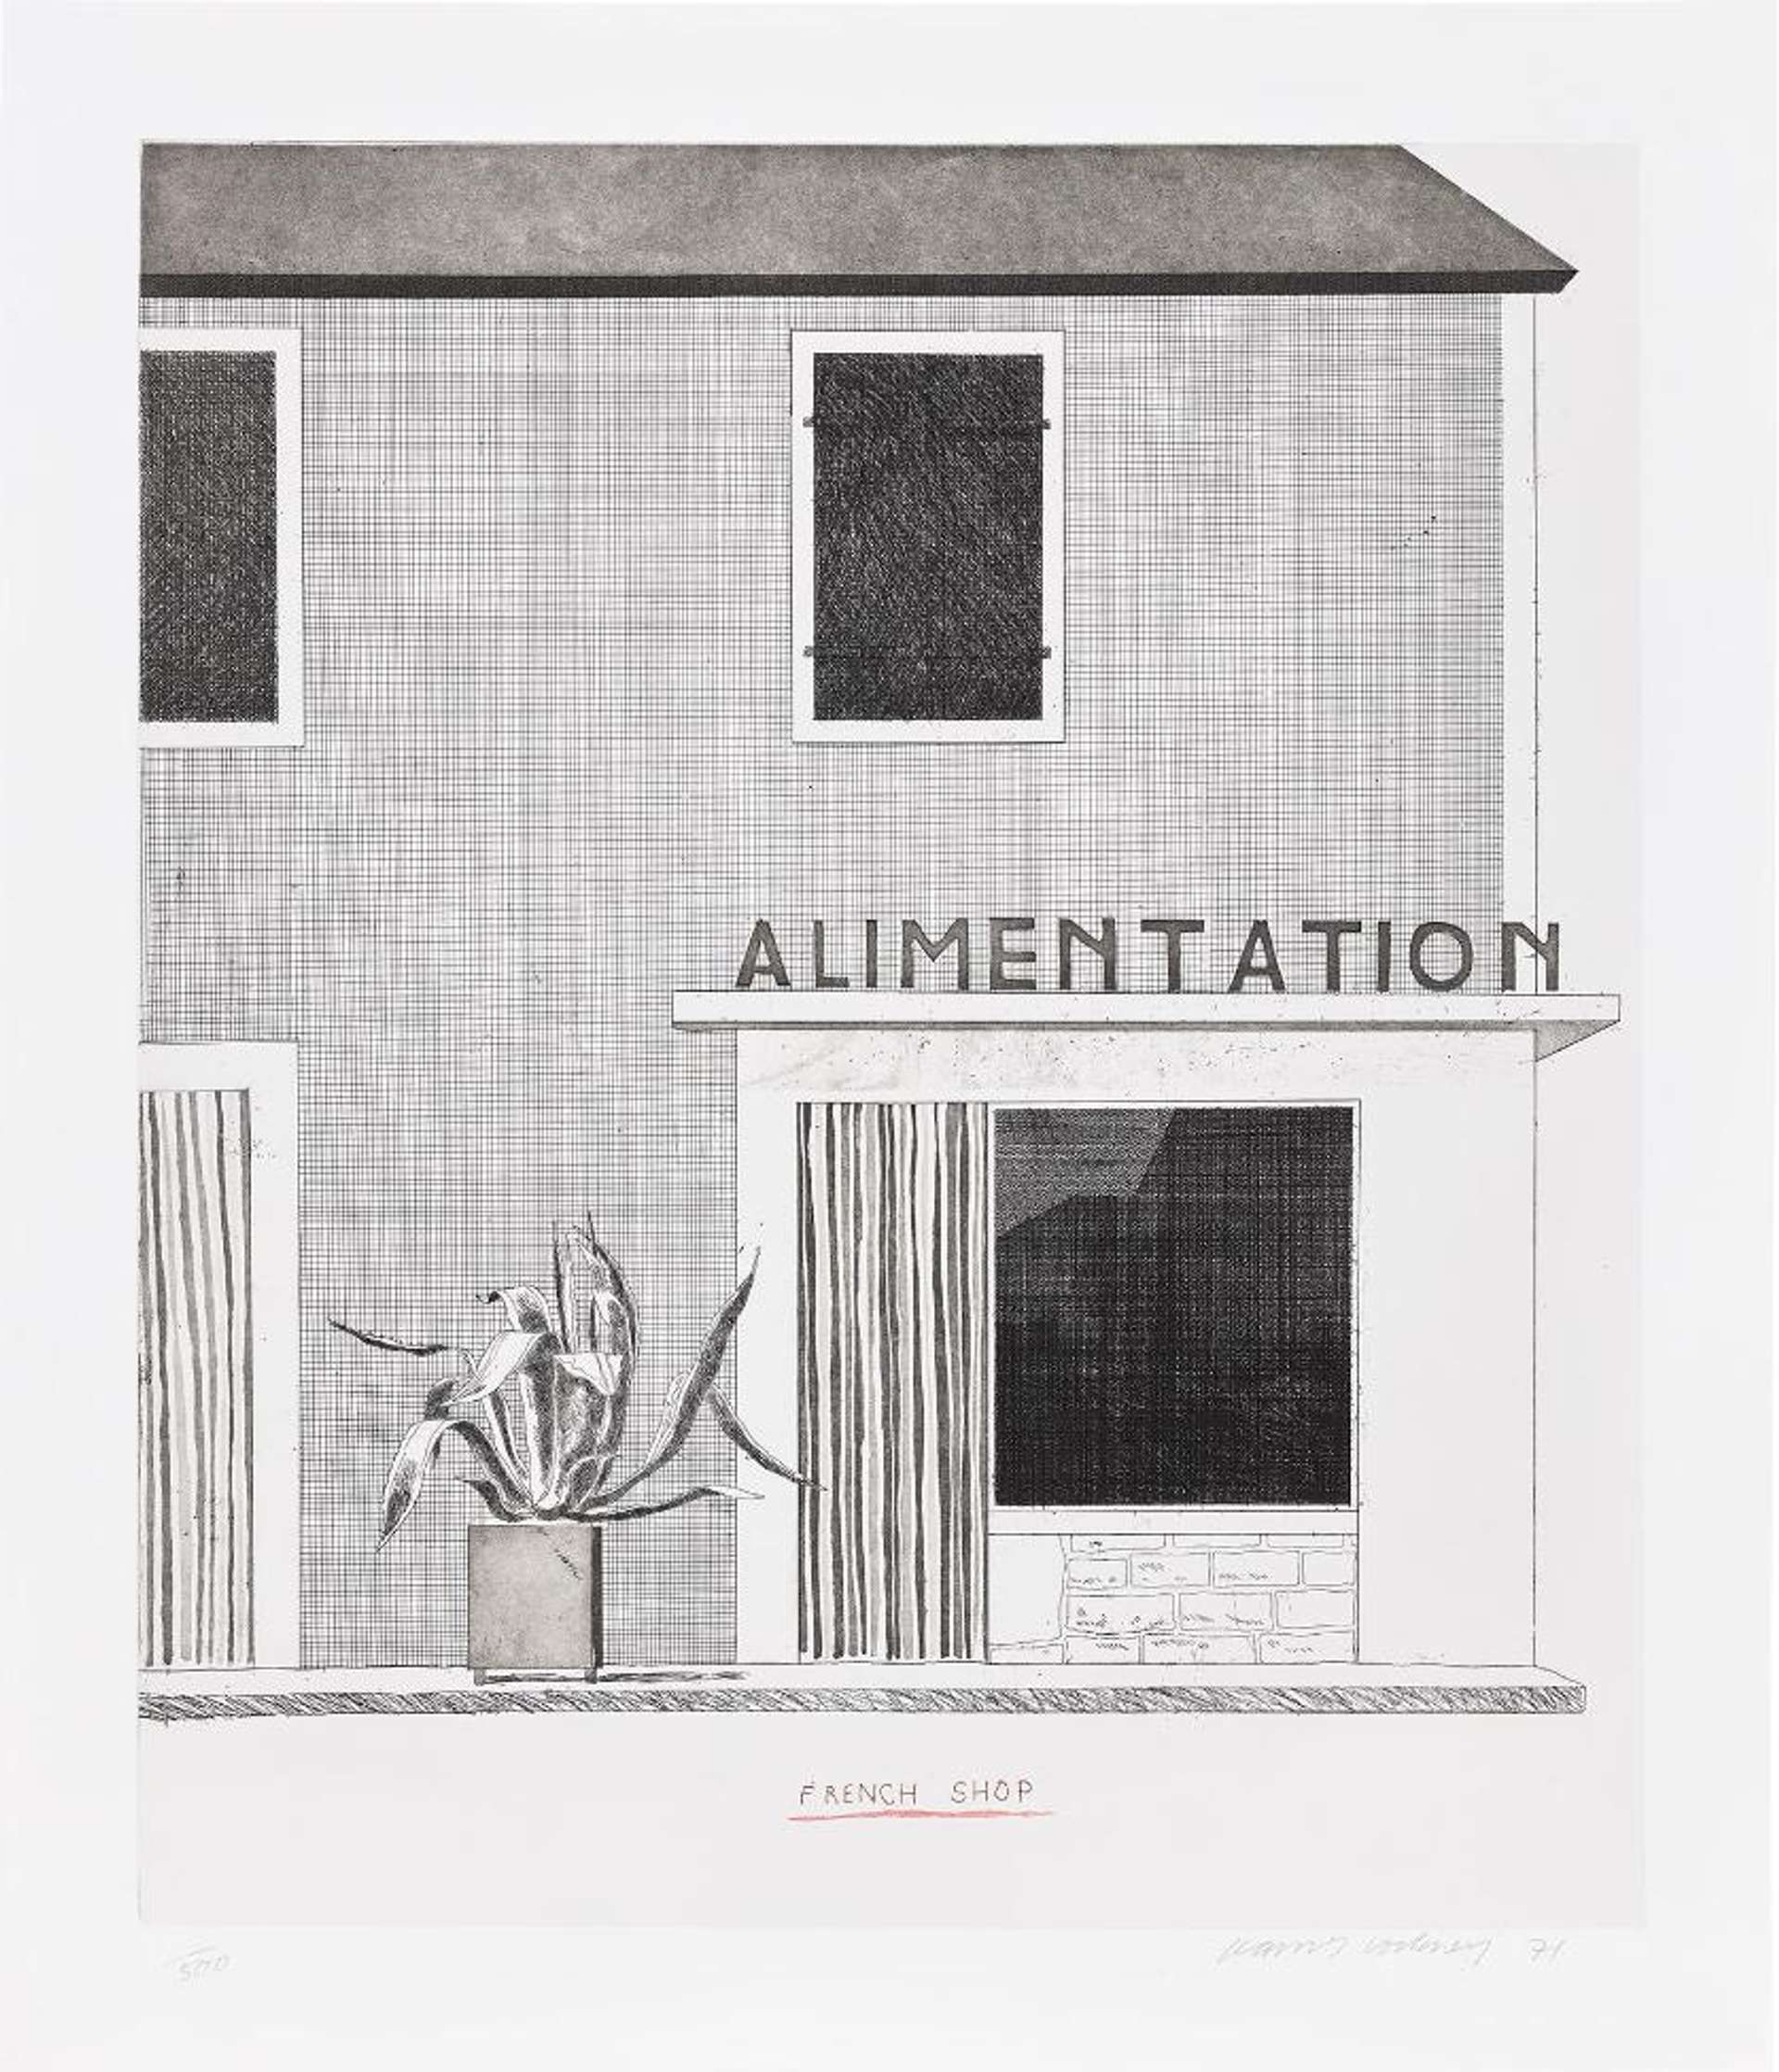  David Hockney’s French Shop. A black and white intaglio print of the exterior of a modern shaped building with a plant and the moniker “ALIMENTATION” on the building. 